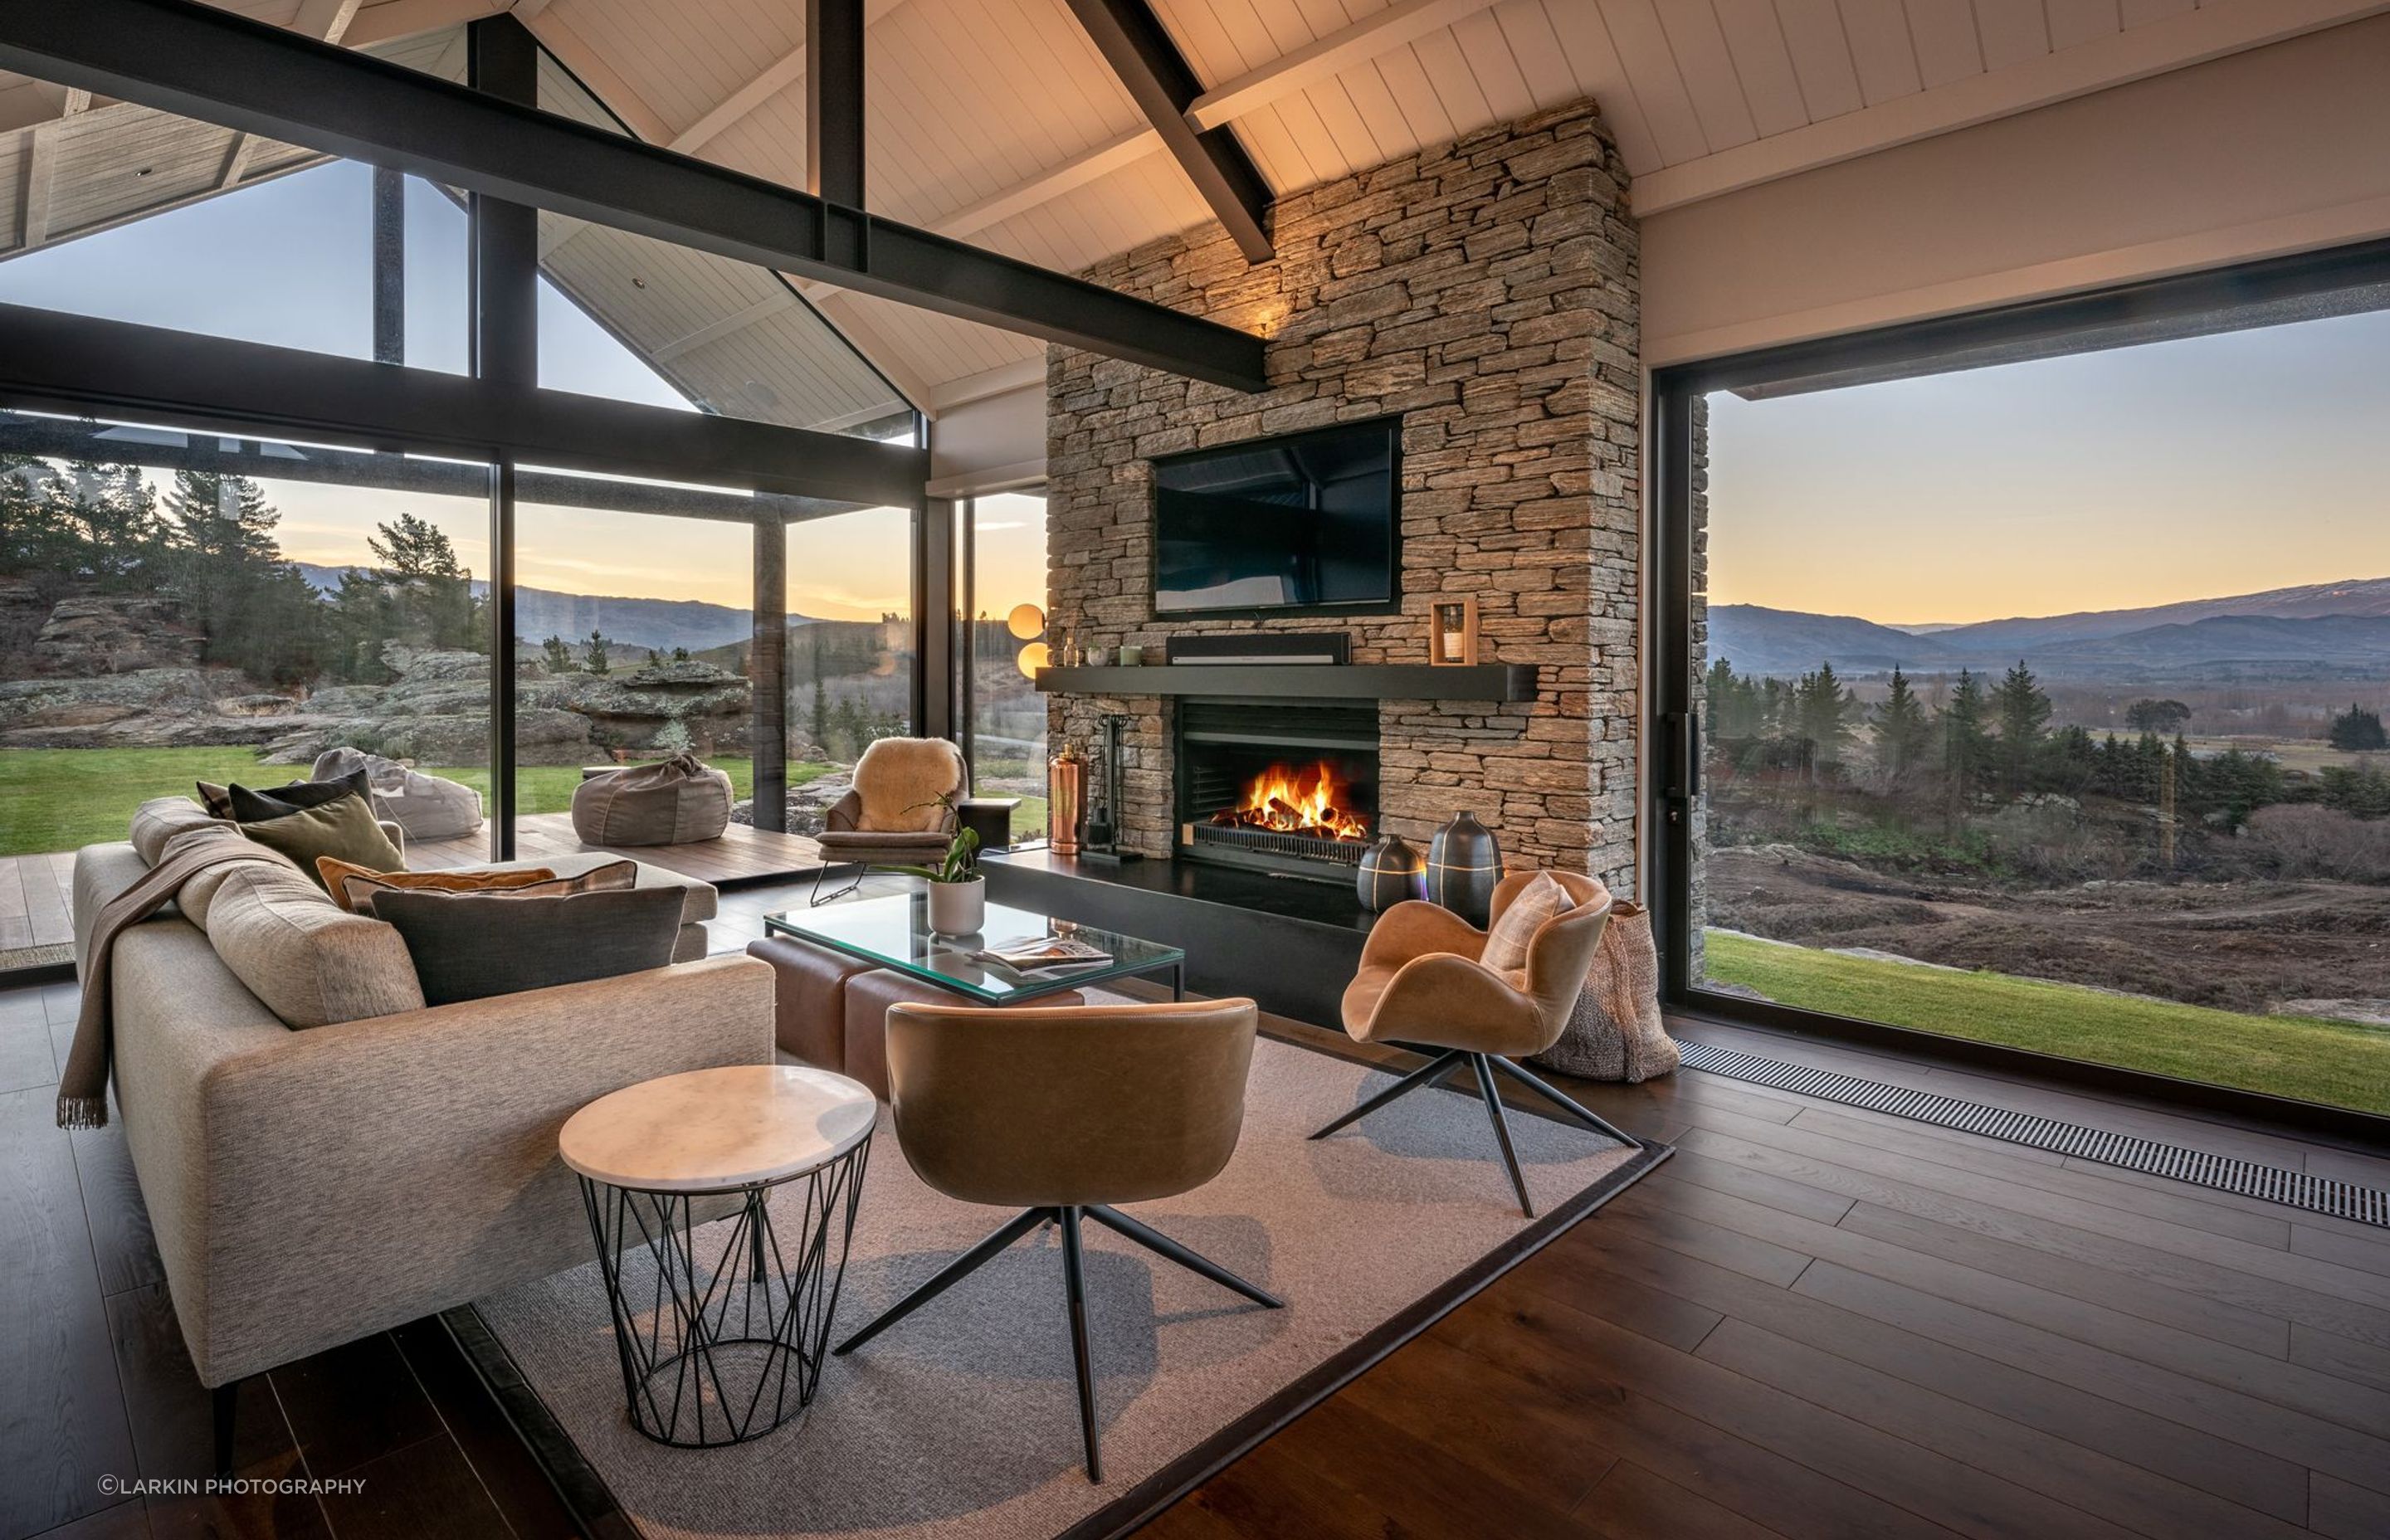 In front of the schist fireplace in the lounge is the perfect spot to relax in the evening and watch the sun set across the valley.